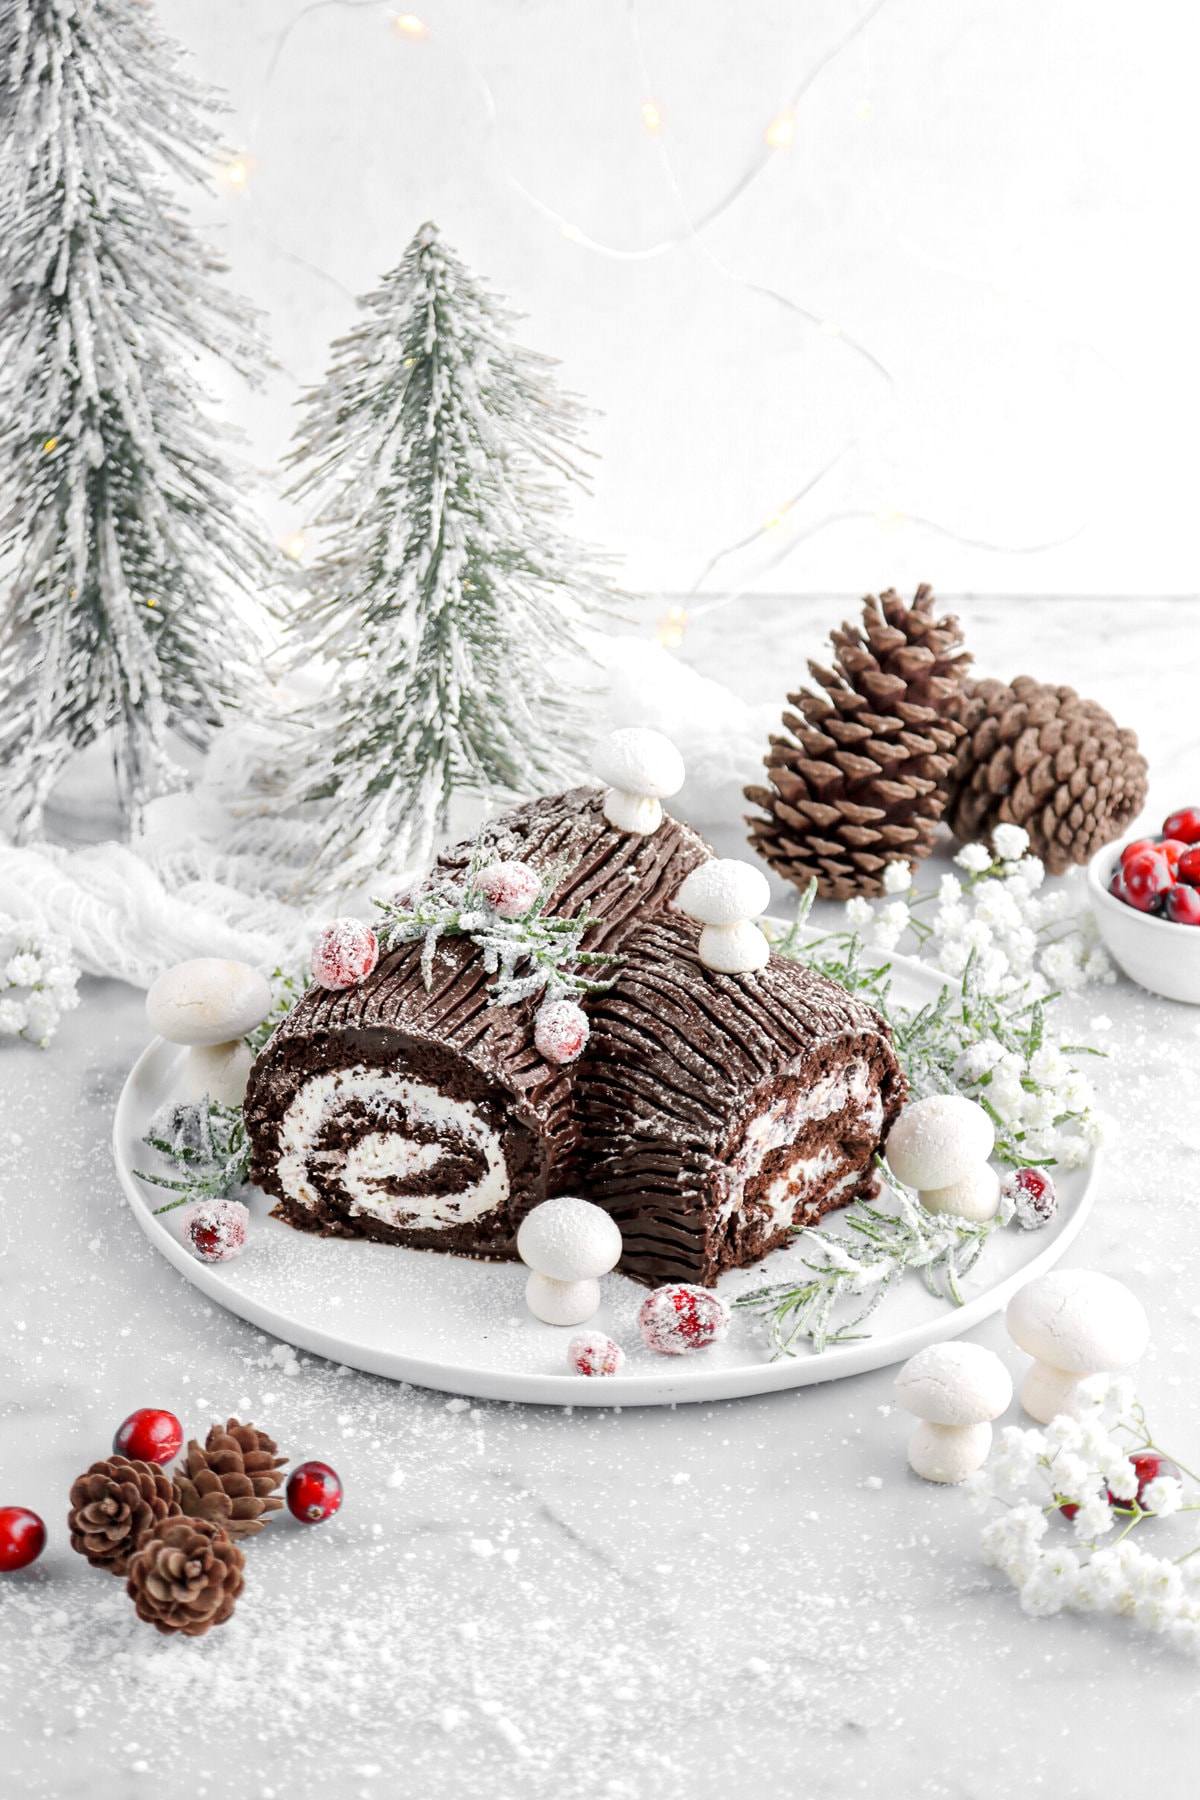 angled image of chocolate yule log on white plate with sugared cranberries and rosemary around, meringue mushrooms, white flowers, and granulated sugar around.